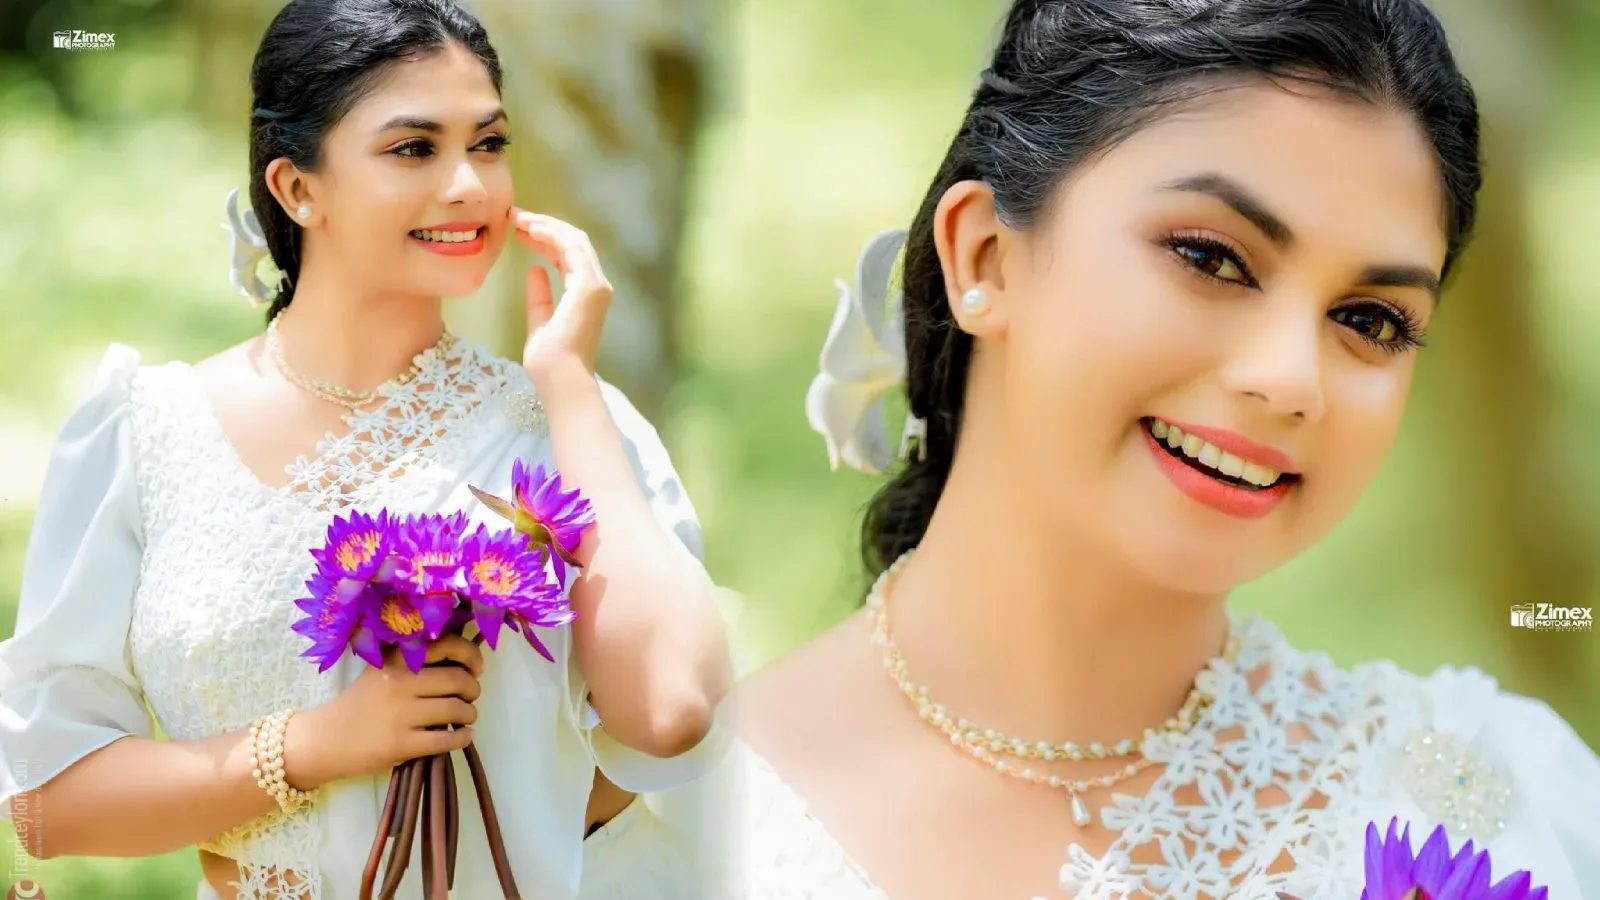 Dancer Damithri Subasinghe looks ethereal in a White saree